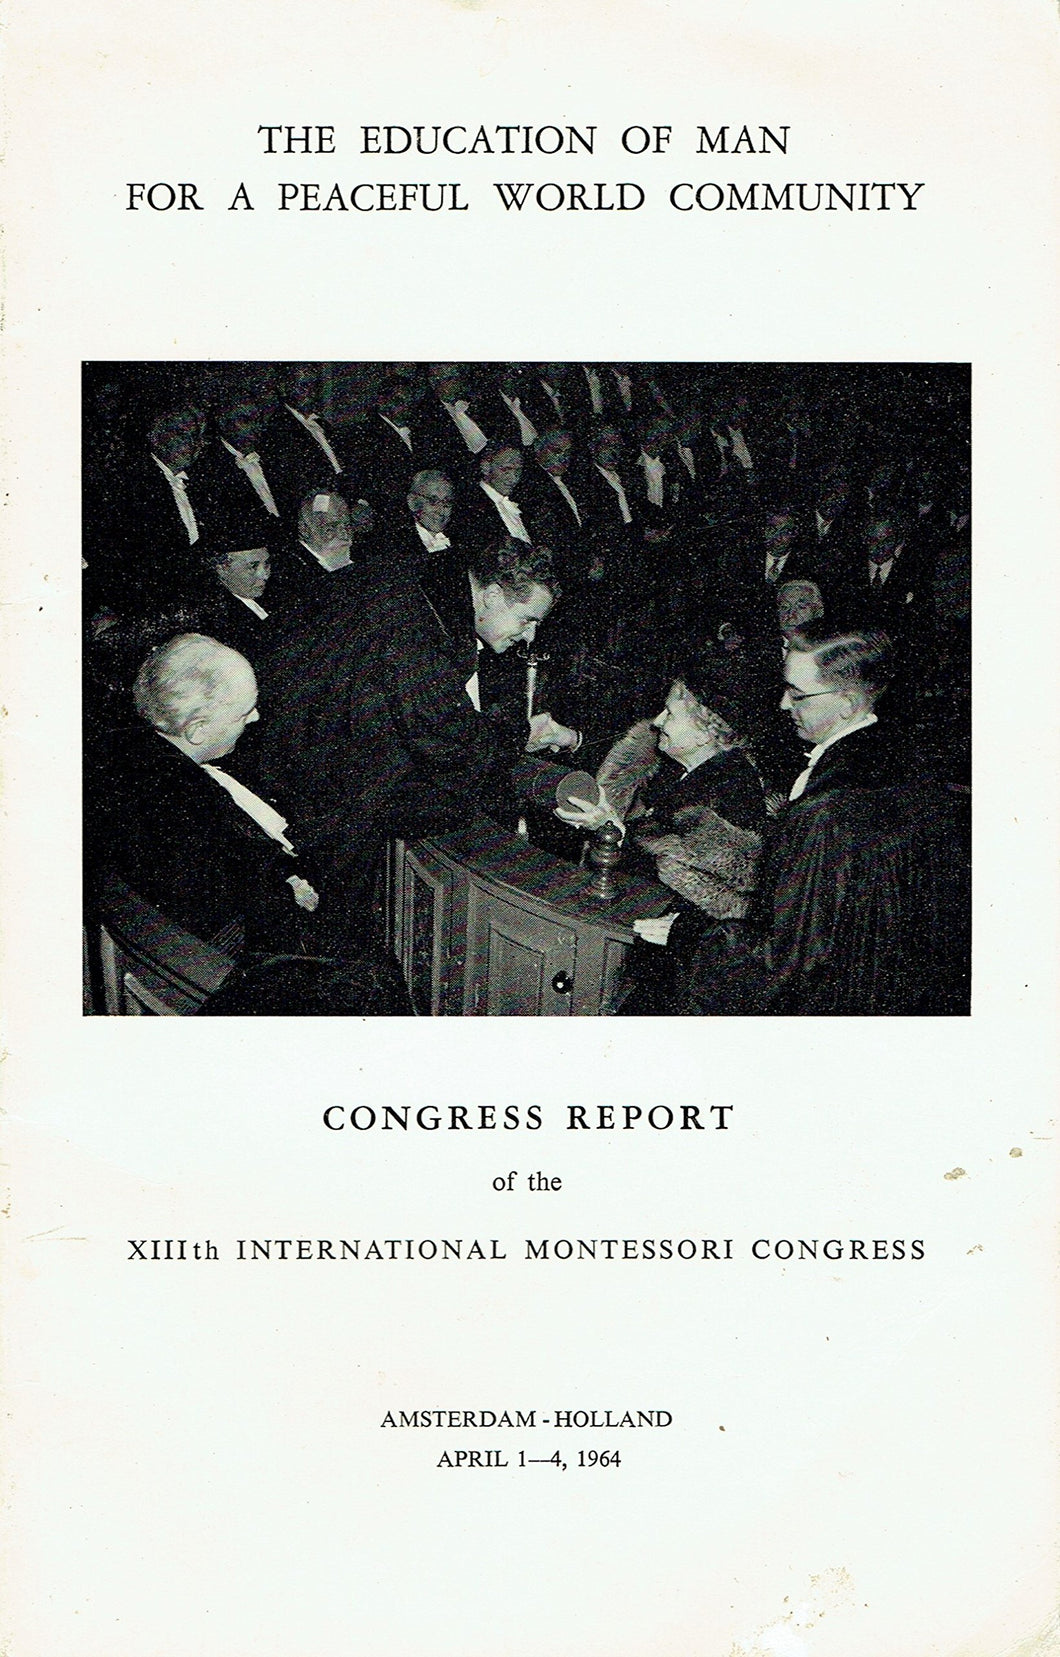 The Education of Man for a Peaceful World Community: Congress Report of the XIIIth International Montessori Congress, Amsterdam, Netherlands, April 1-4, 1964